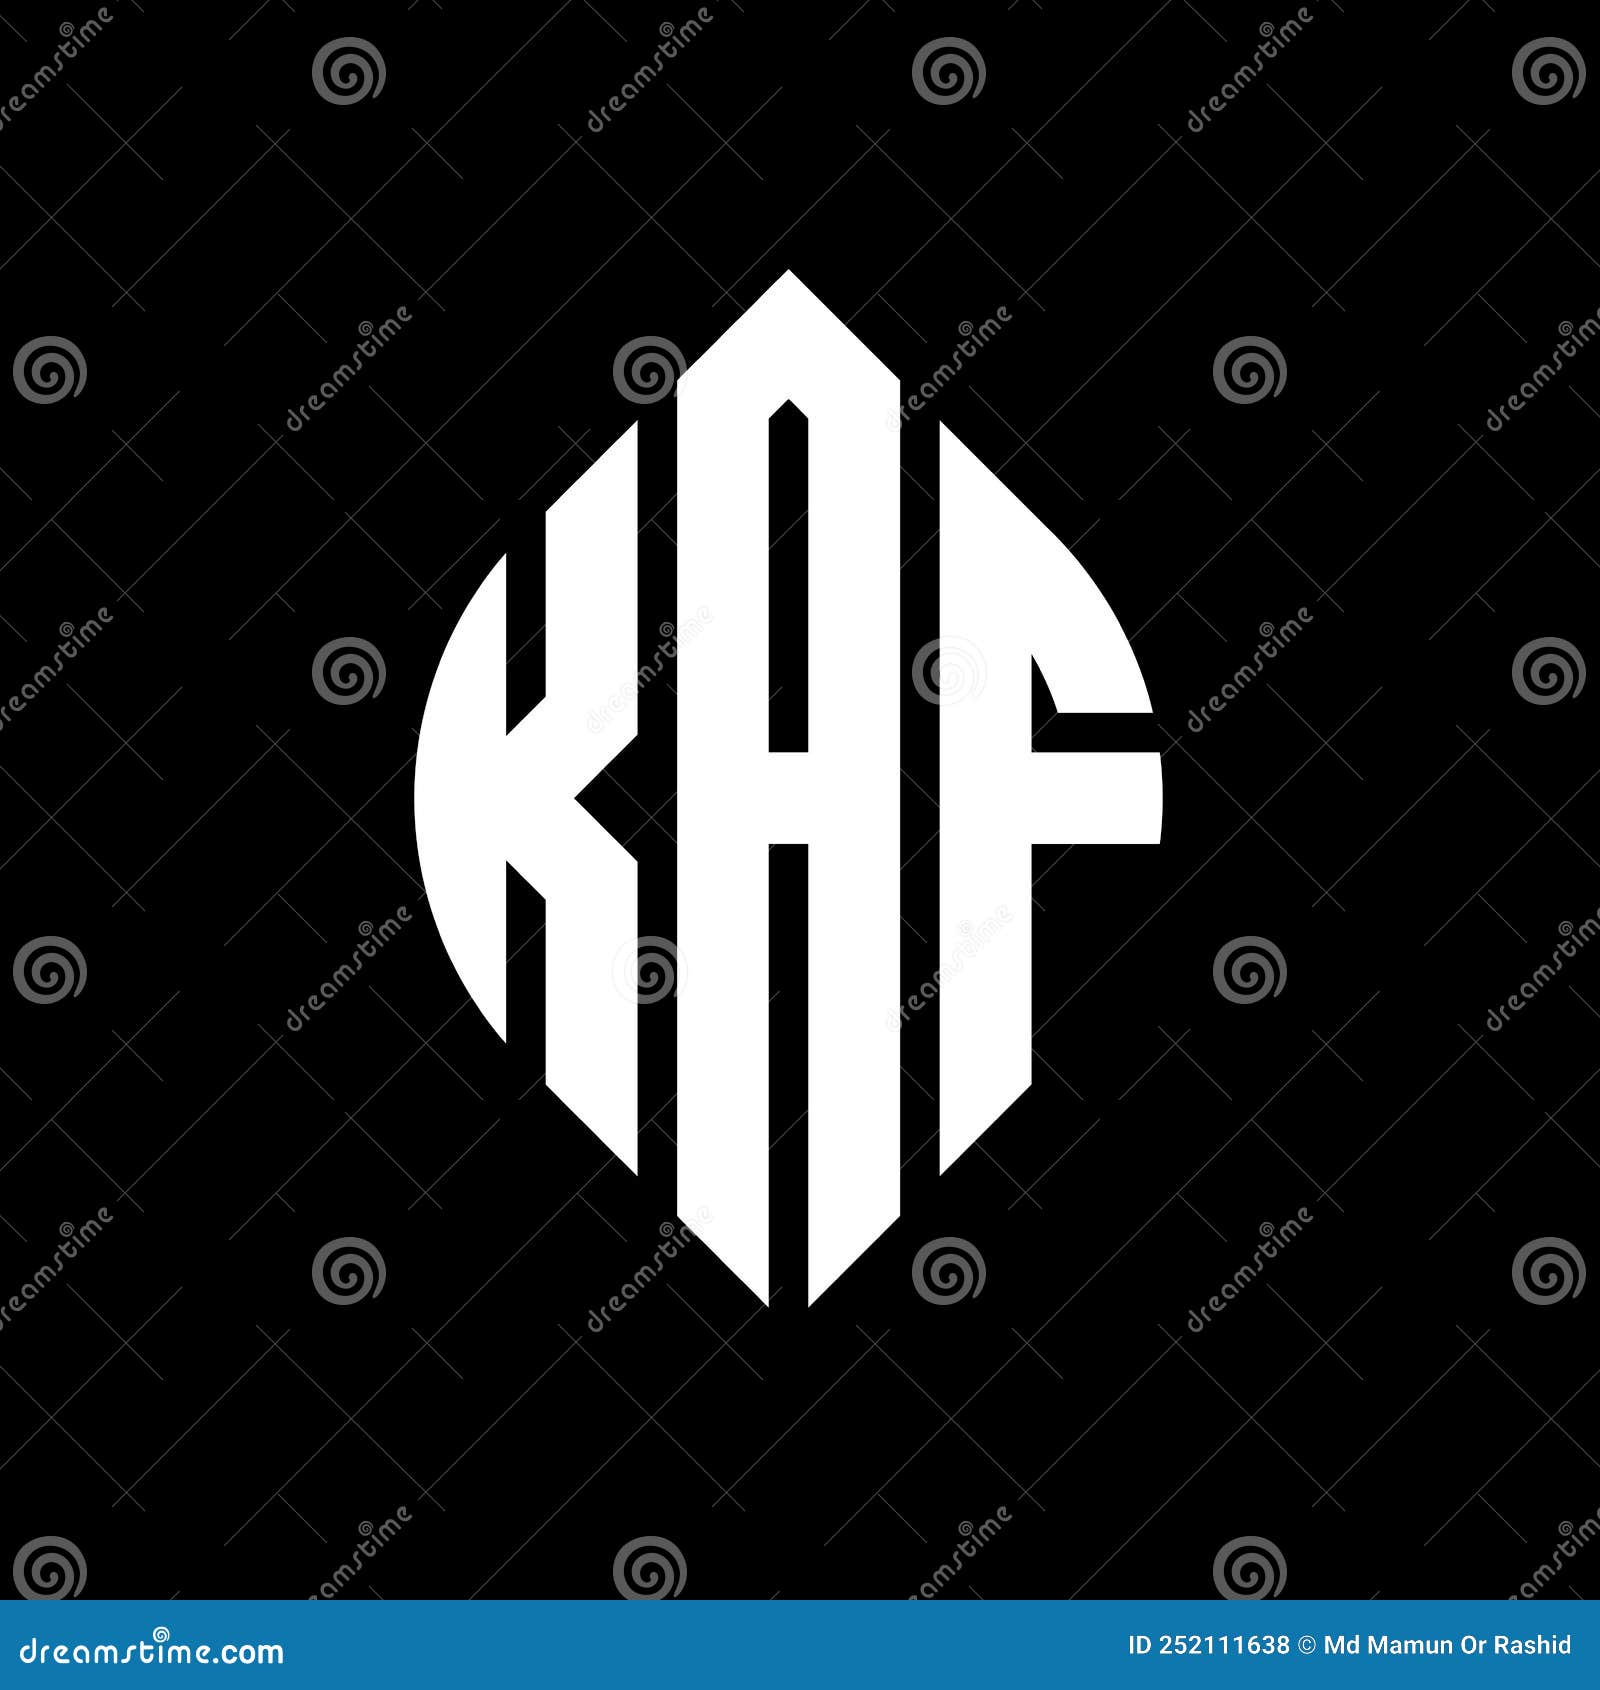 kaf circle letter logo  with circle and ellipse . kaf ellipse letters with typographic style. the three initials form a